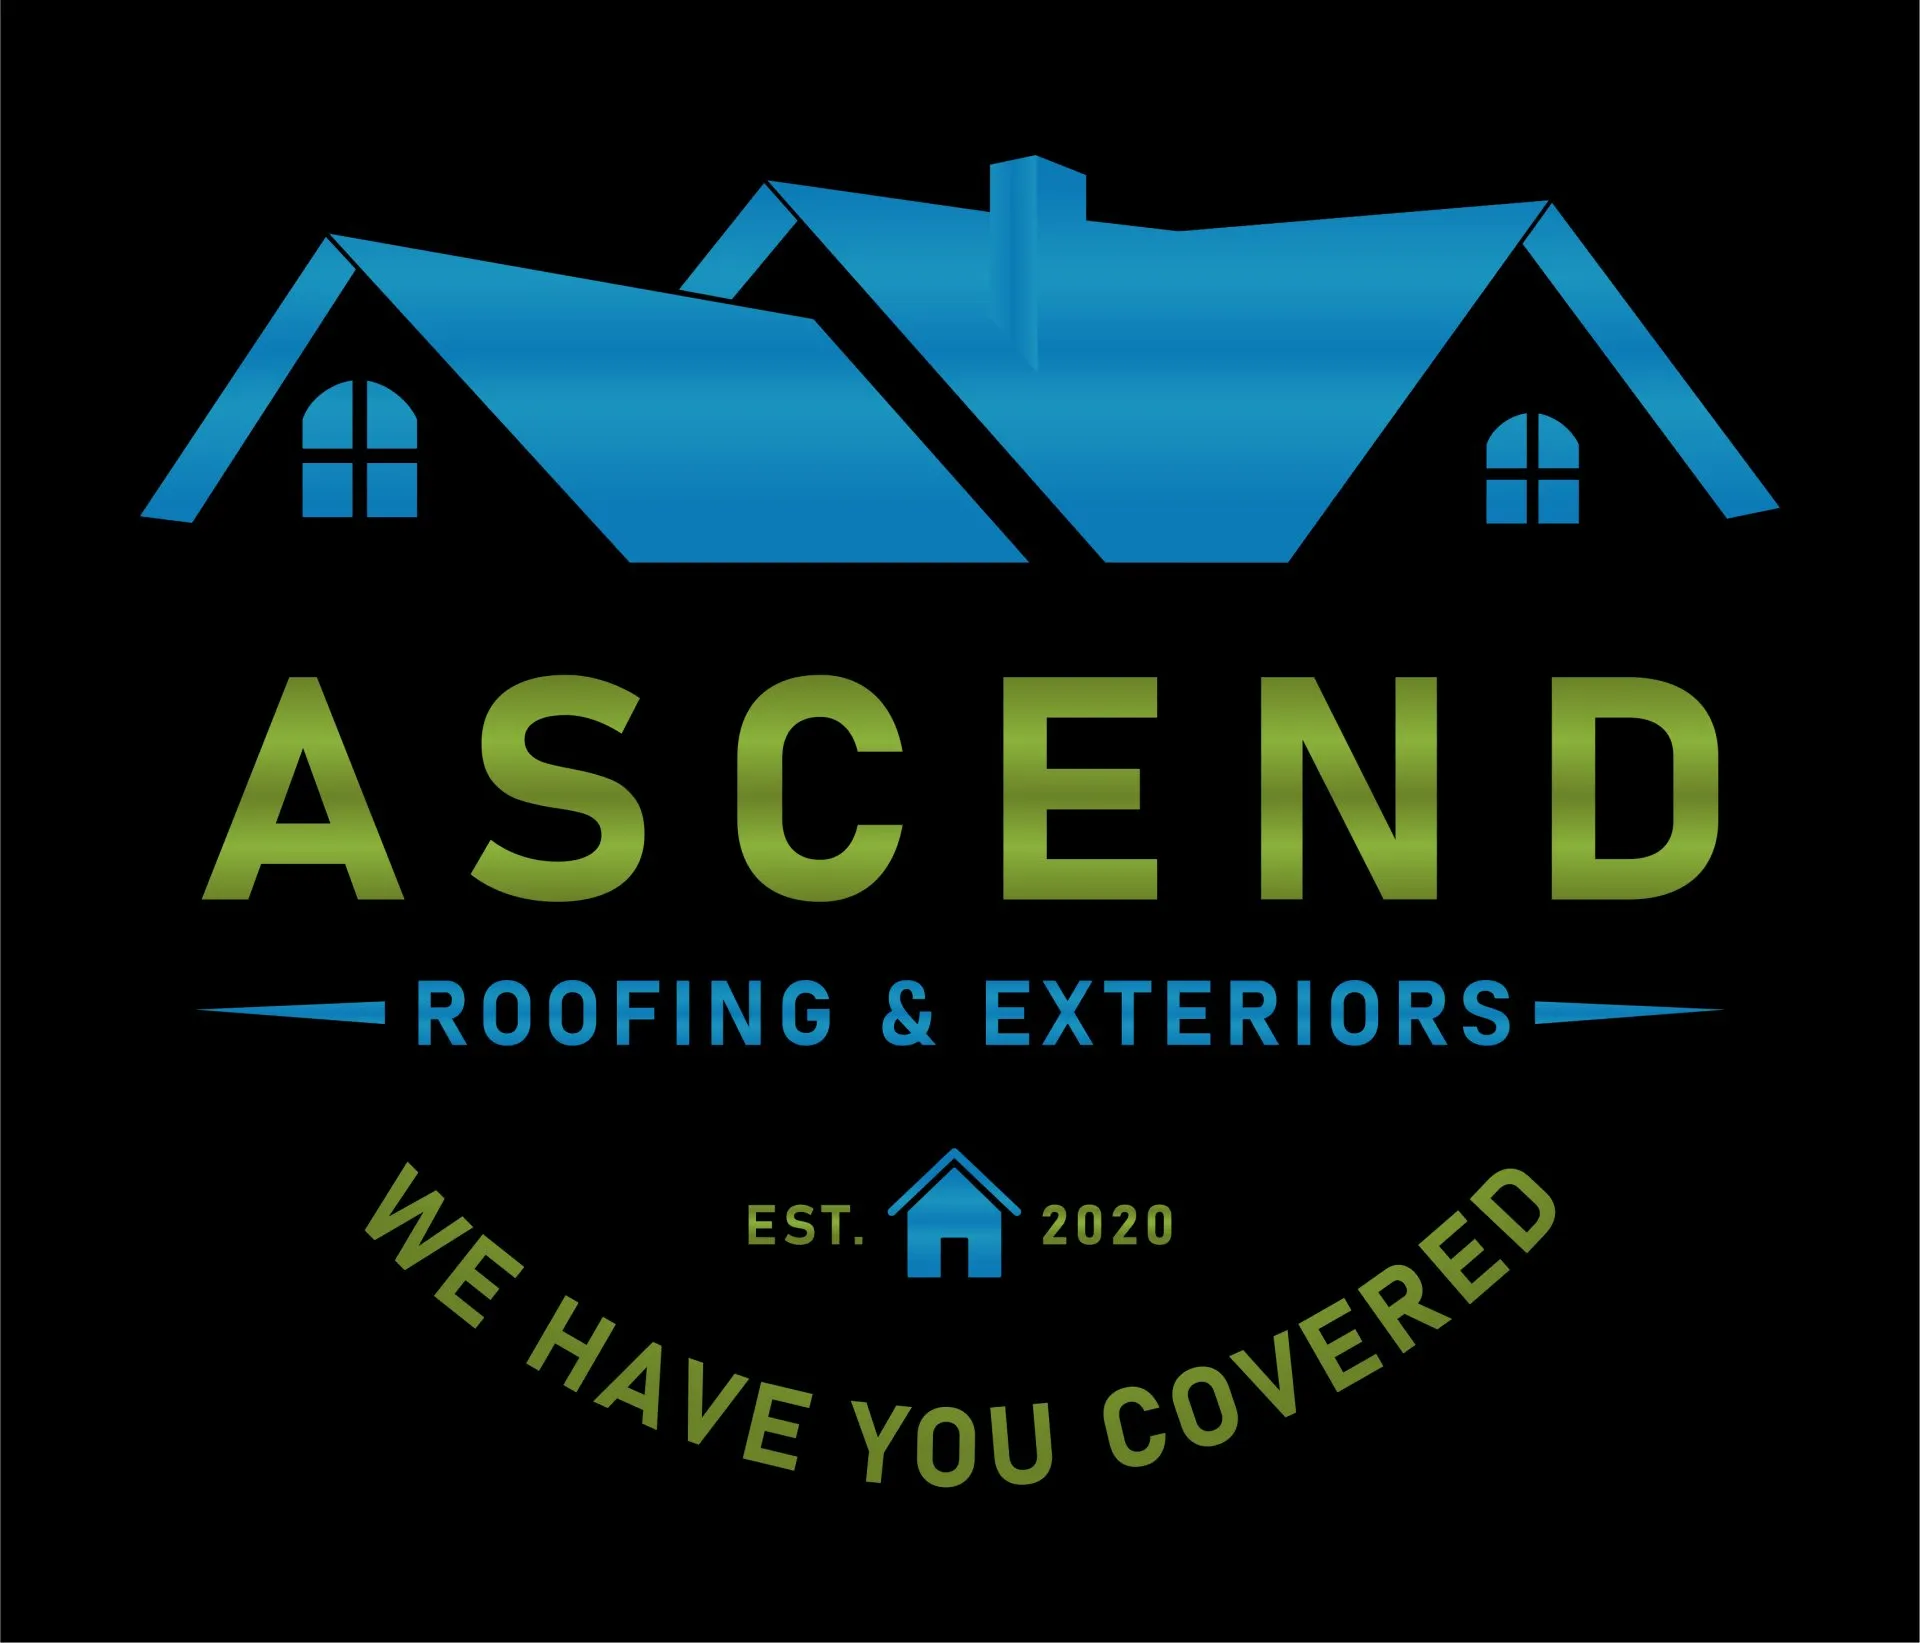 Ascend Roofing & Exteriors Announces the Signs Indicating Time for Roof Replacement